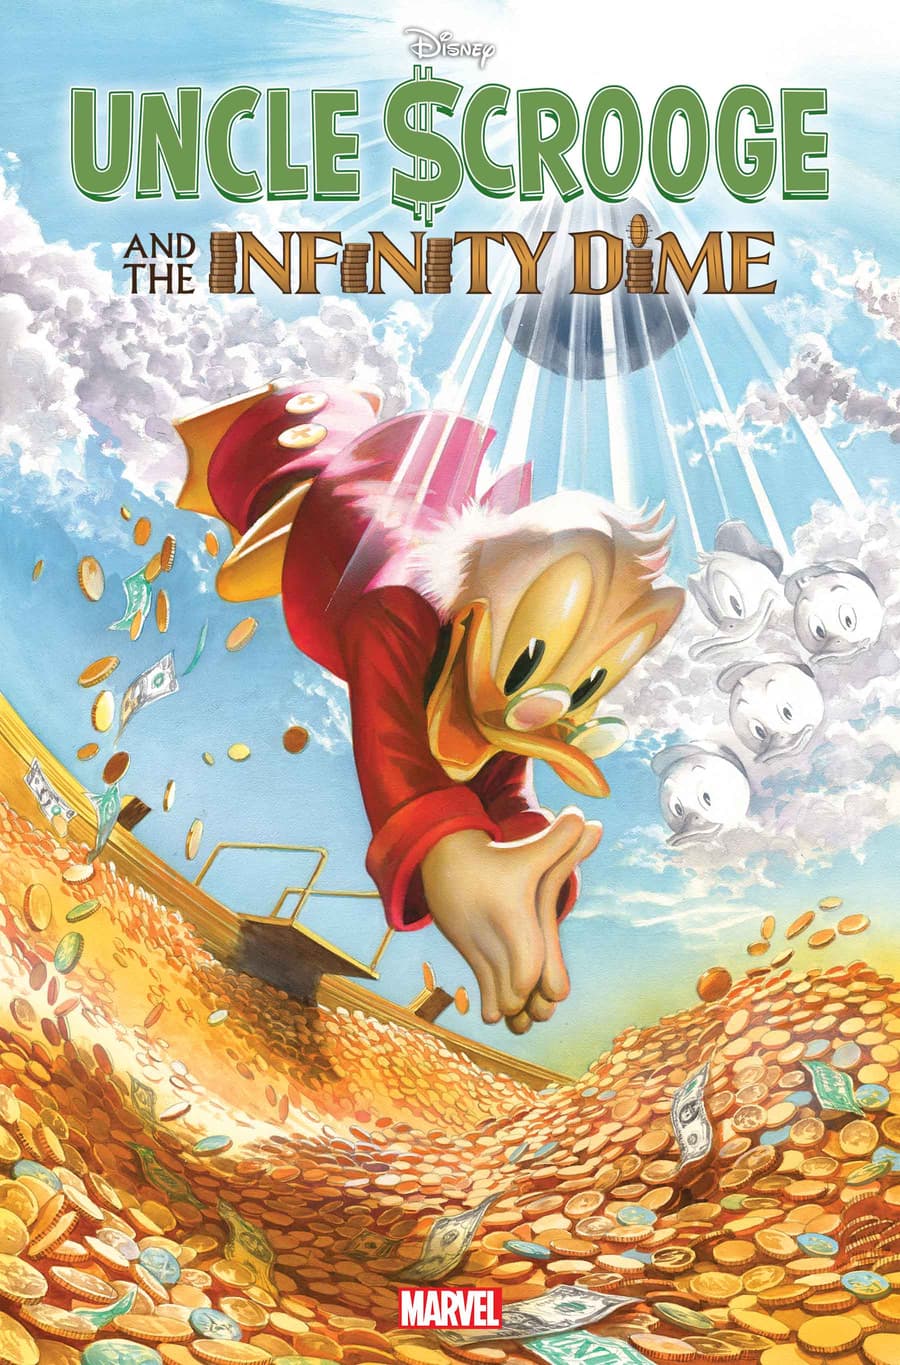 UNCLE $CROOGE AND THE INFINITY DIME #1 Cover B by Alex Ross